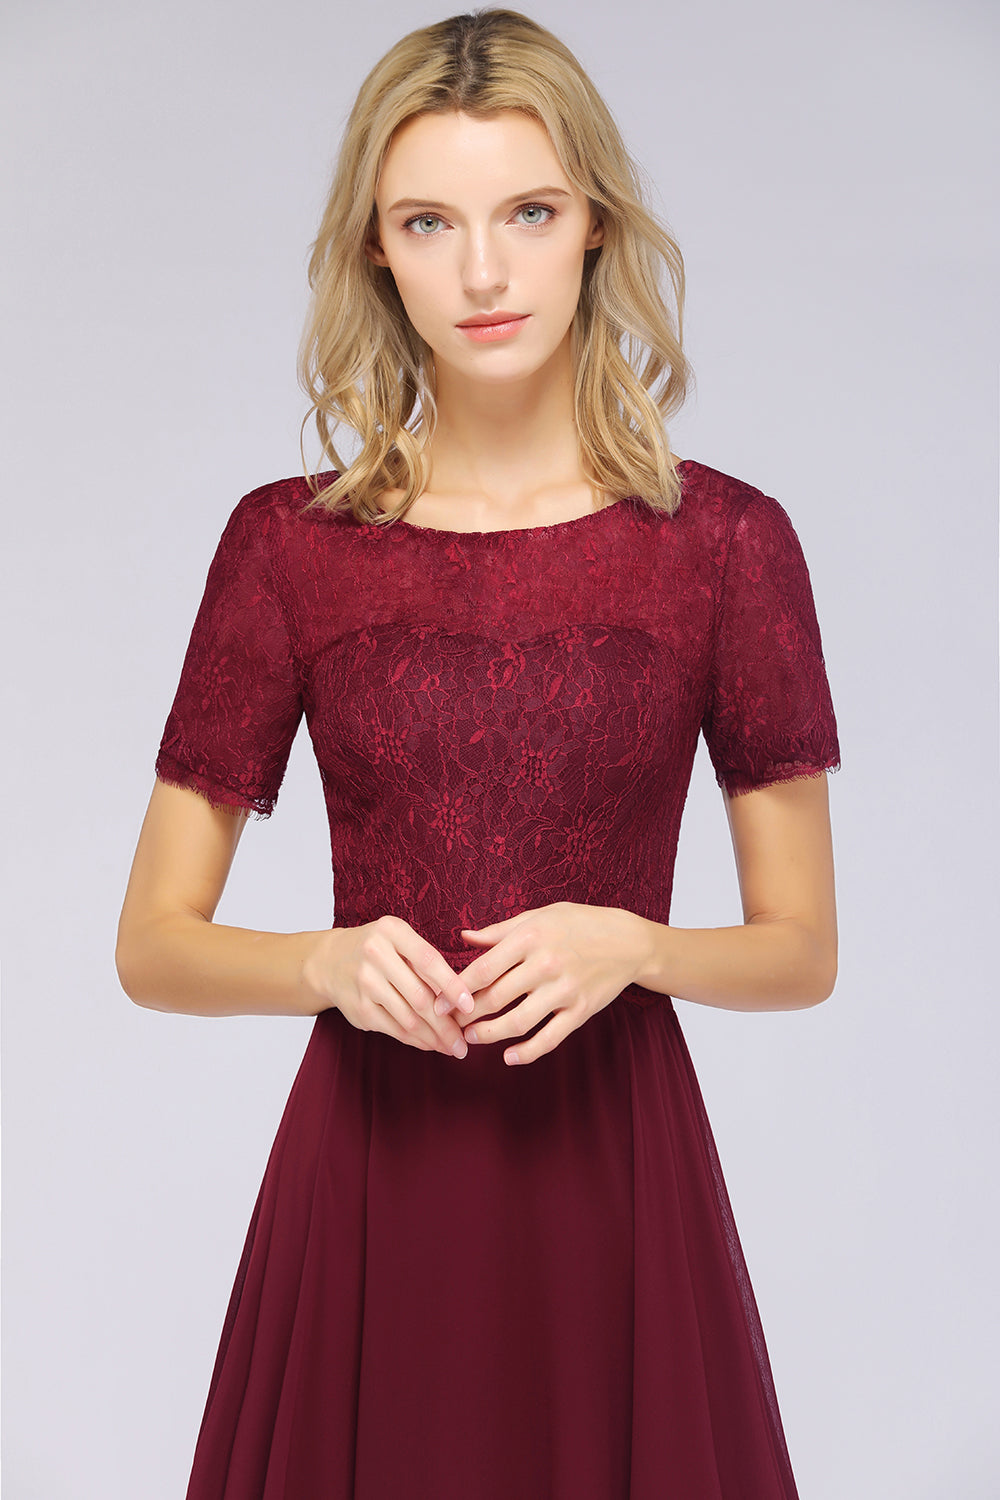 Chic Lace Long Burgundy Backless Bridesmaid Dress With Short-Sleeves